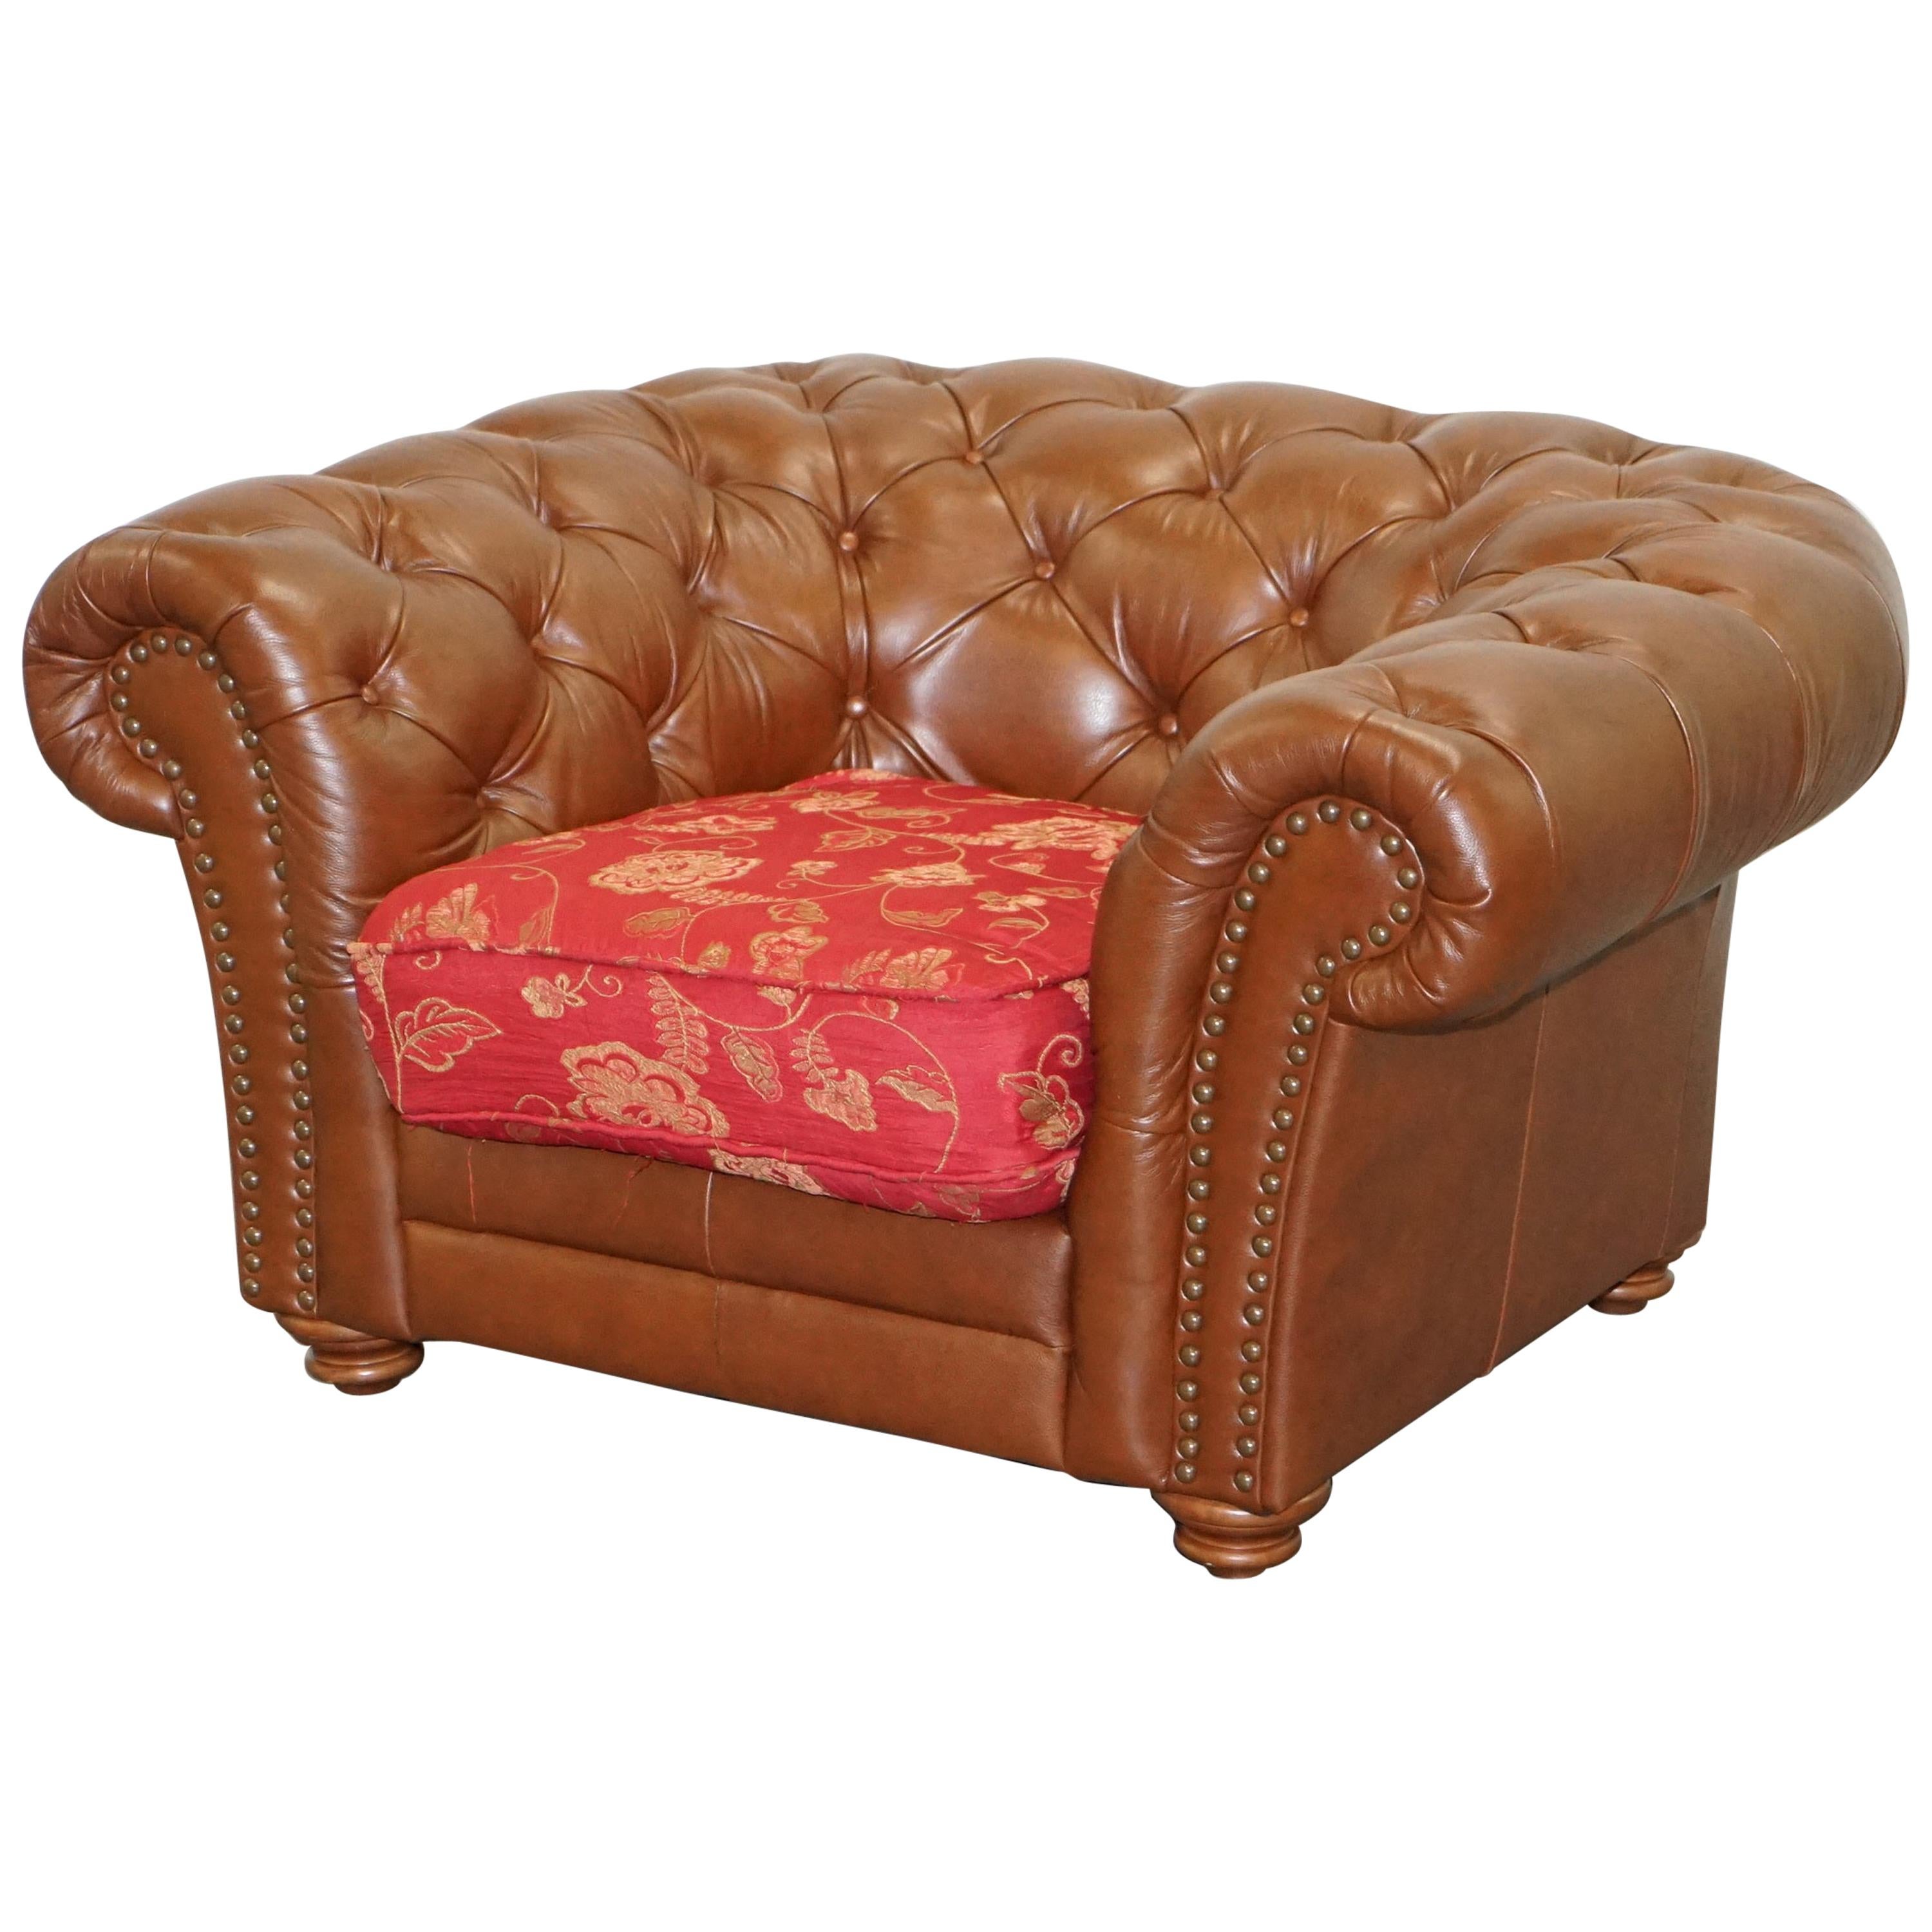 Tetrad Made in England Brown Leather Chesterfield Armchair Part of Full Suite